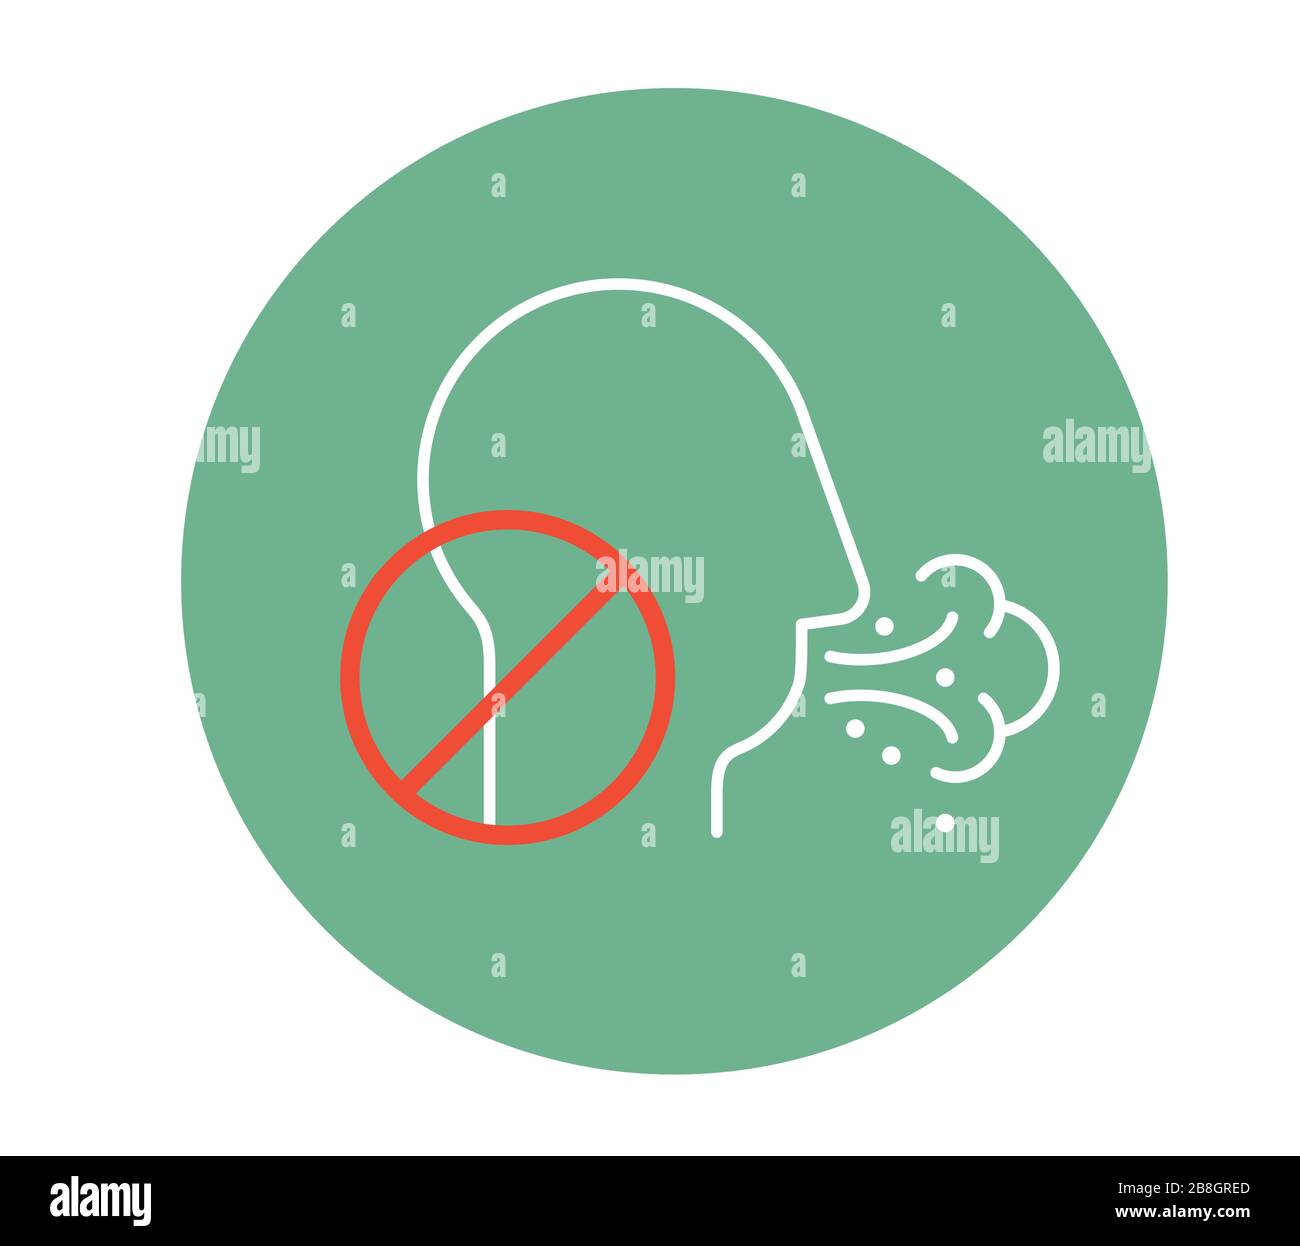 Avoid Cough and Sneeze in Public Spaces - Icon as EPS 10 File Stock Vector